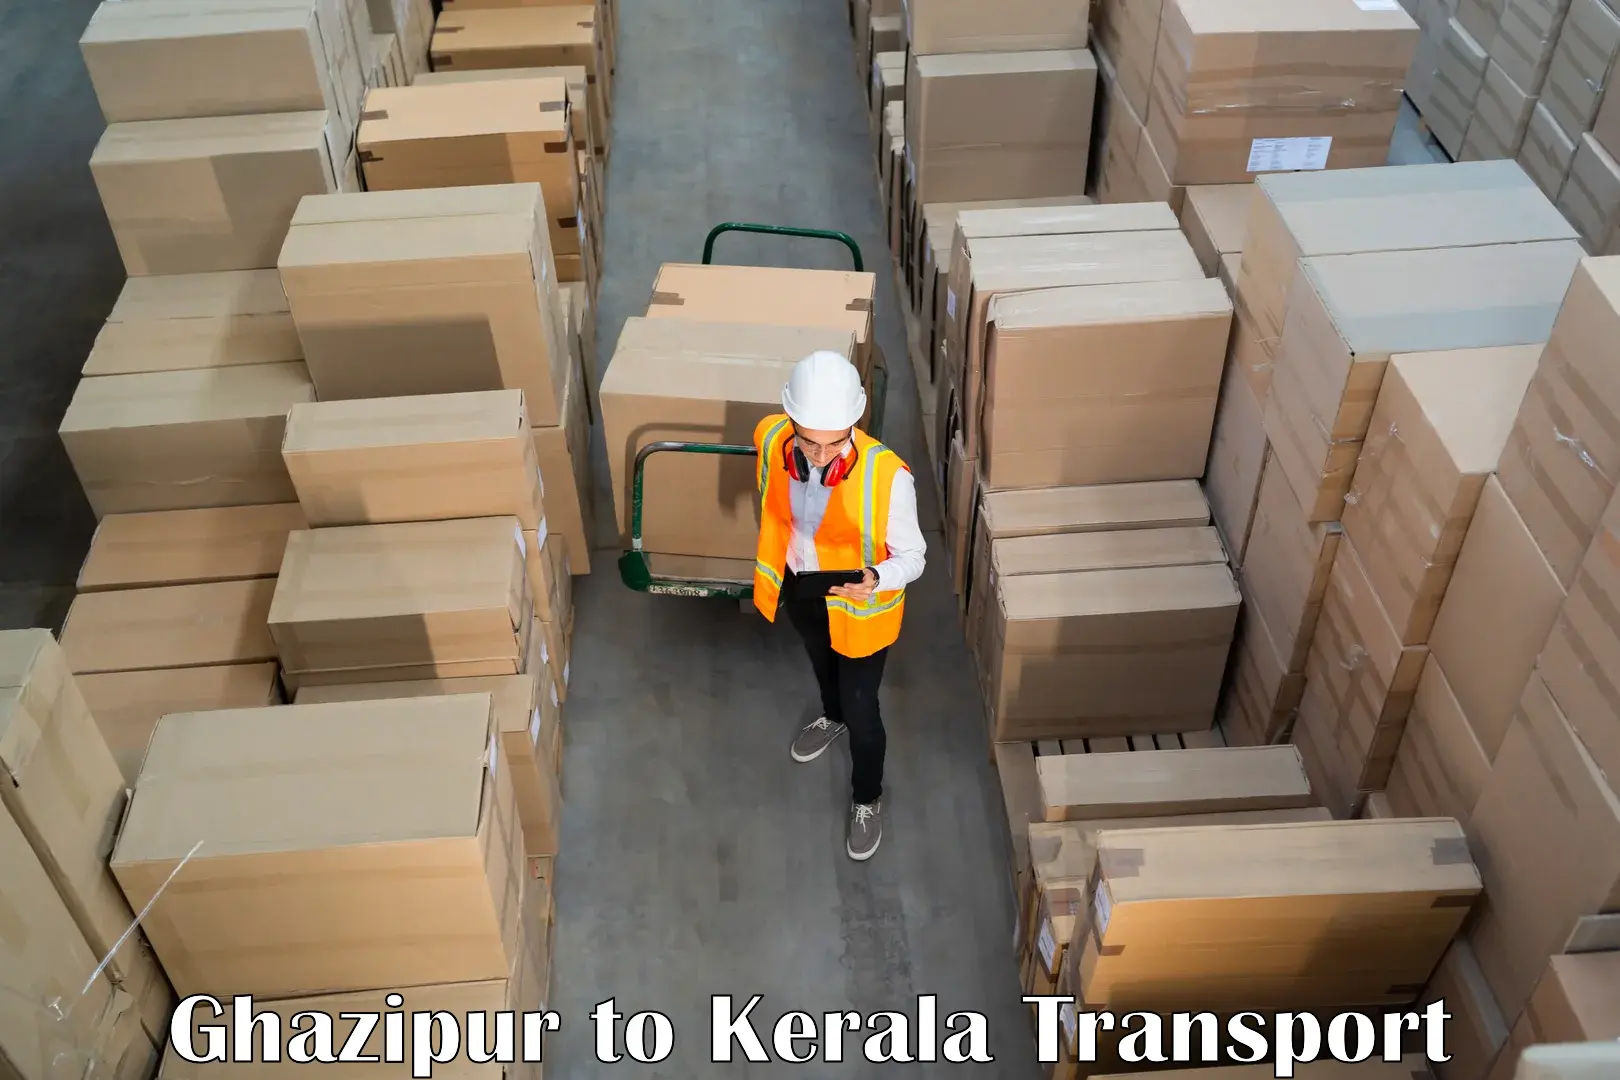 Express transport services Ghazipur to Pathanamthitta